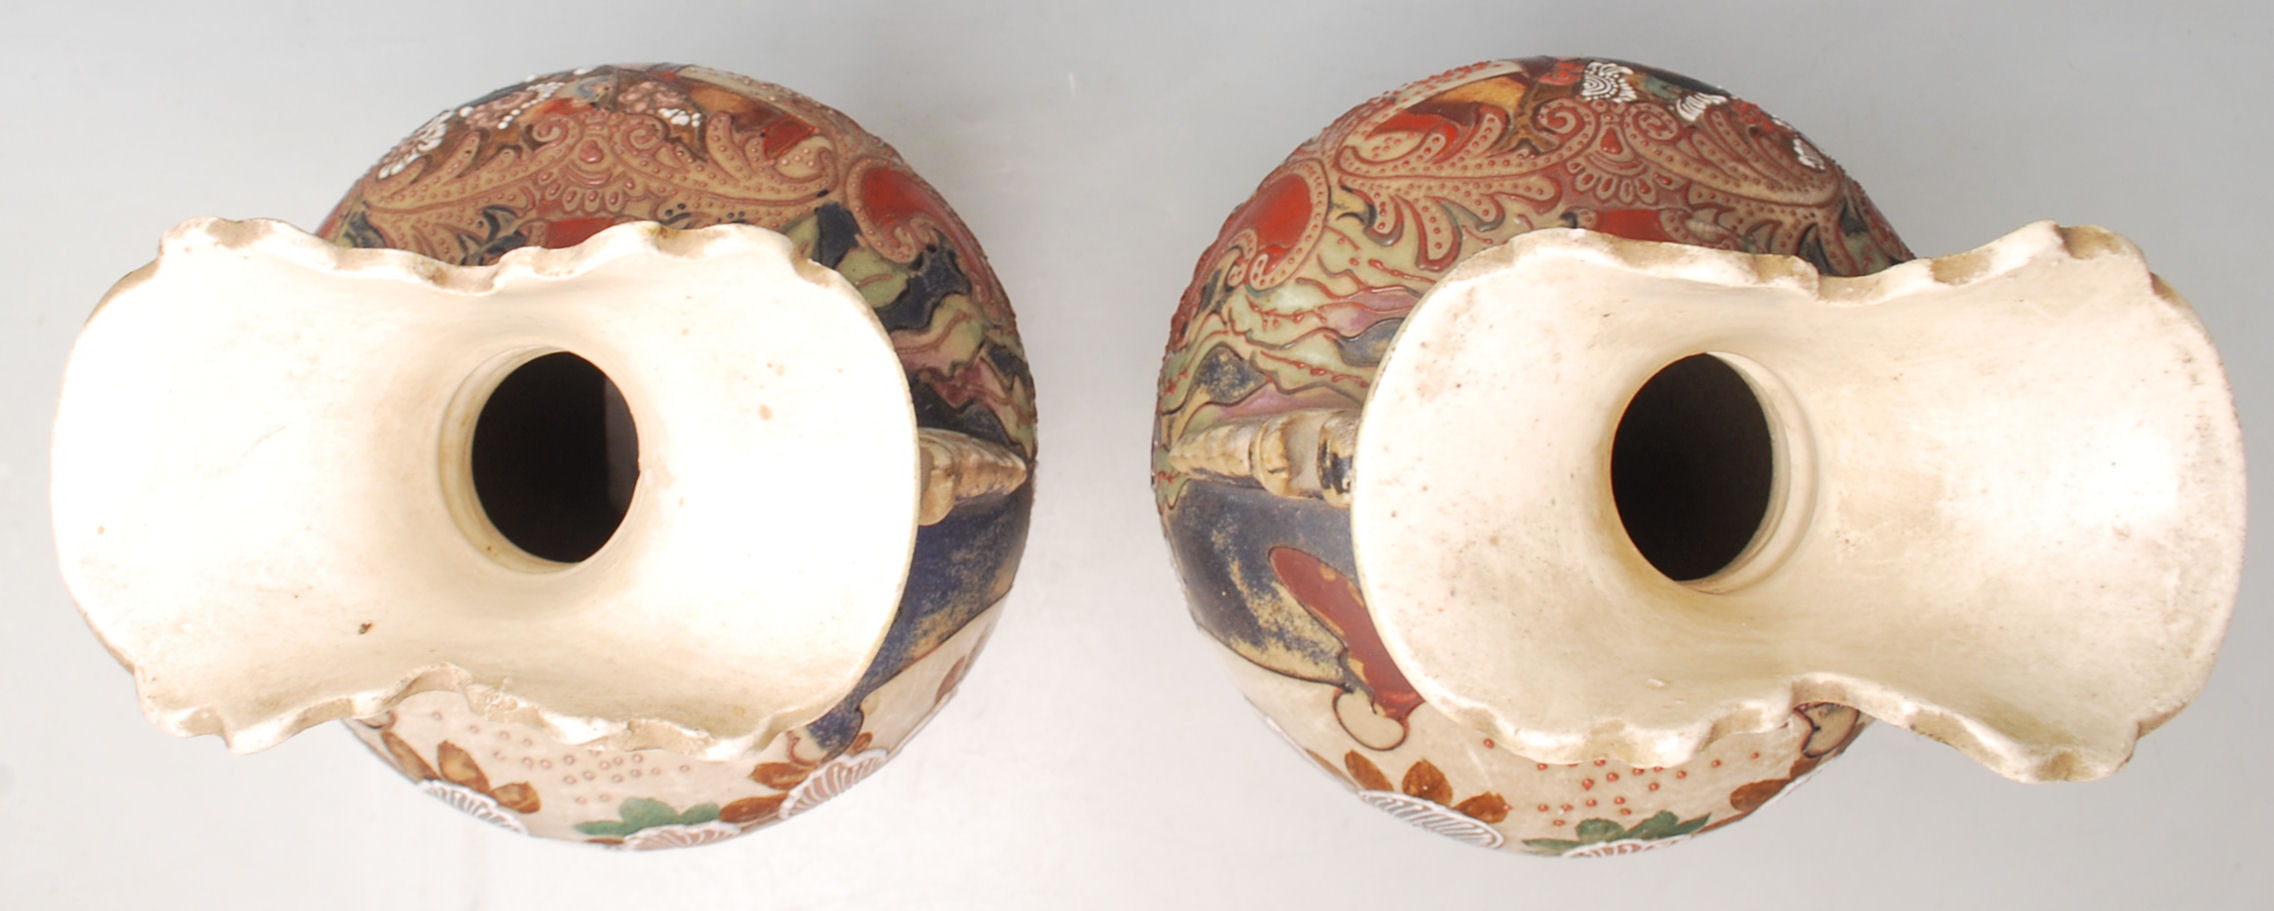 A pair of 20th Century Meiji revival Japanese vases having a flared top over a shaped body on a - Image 4 of 4